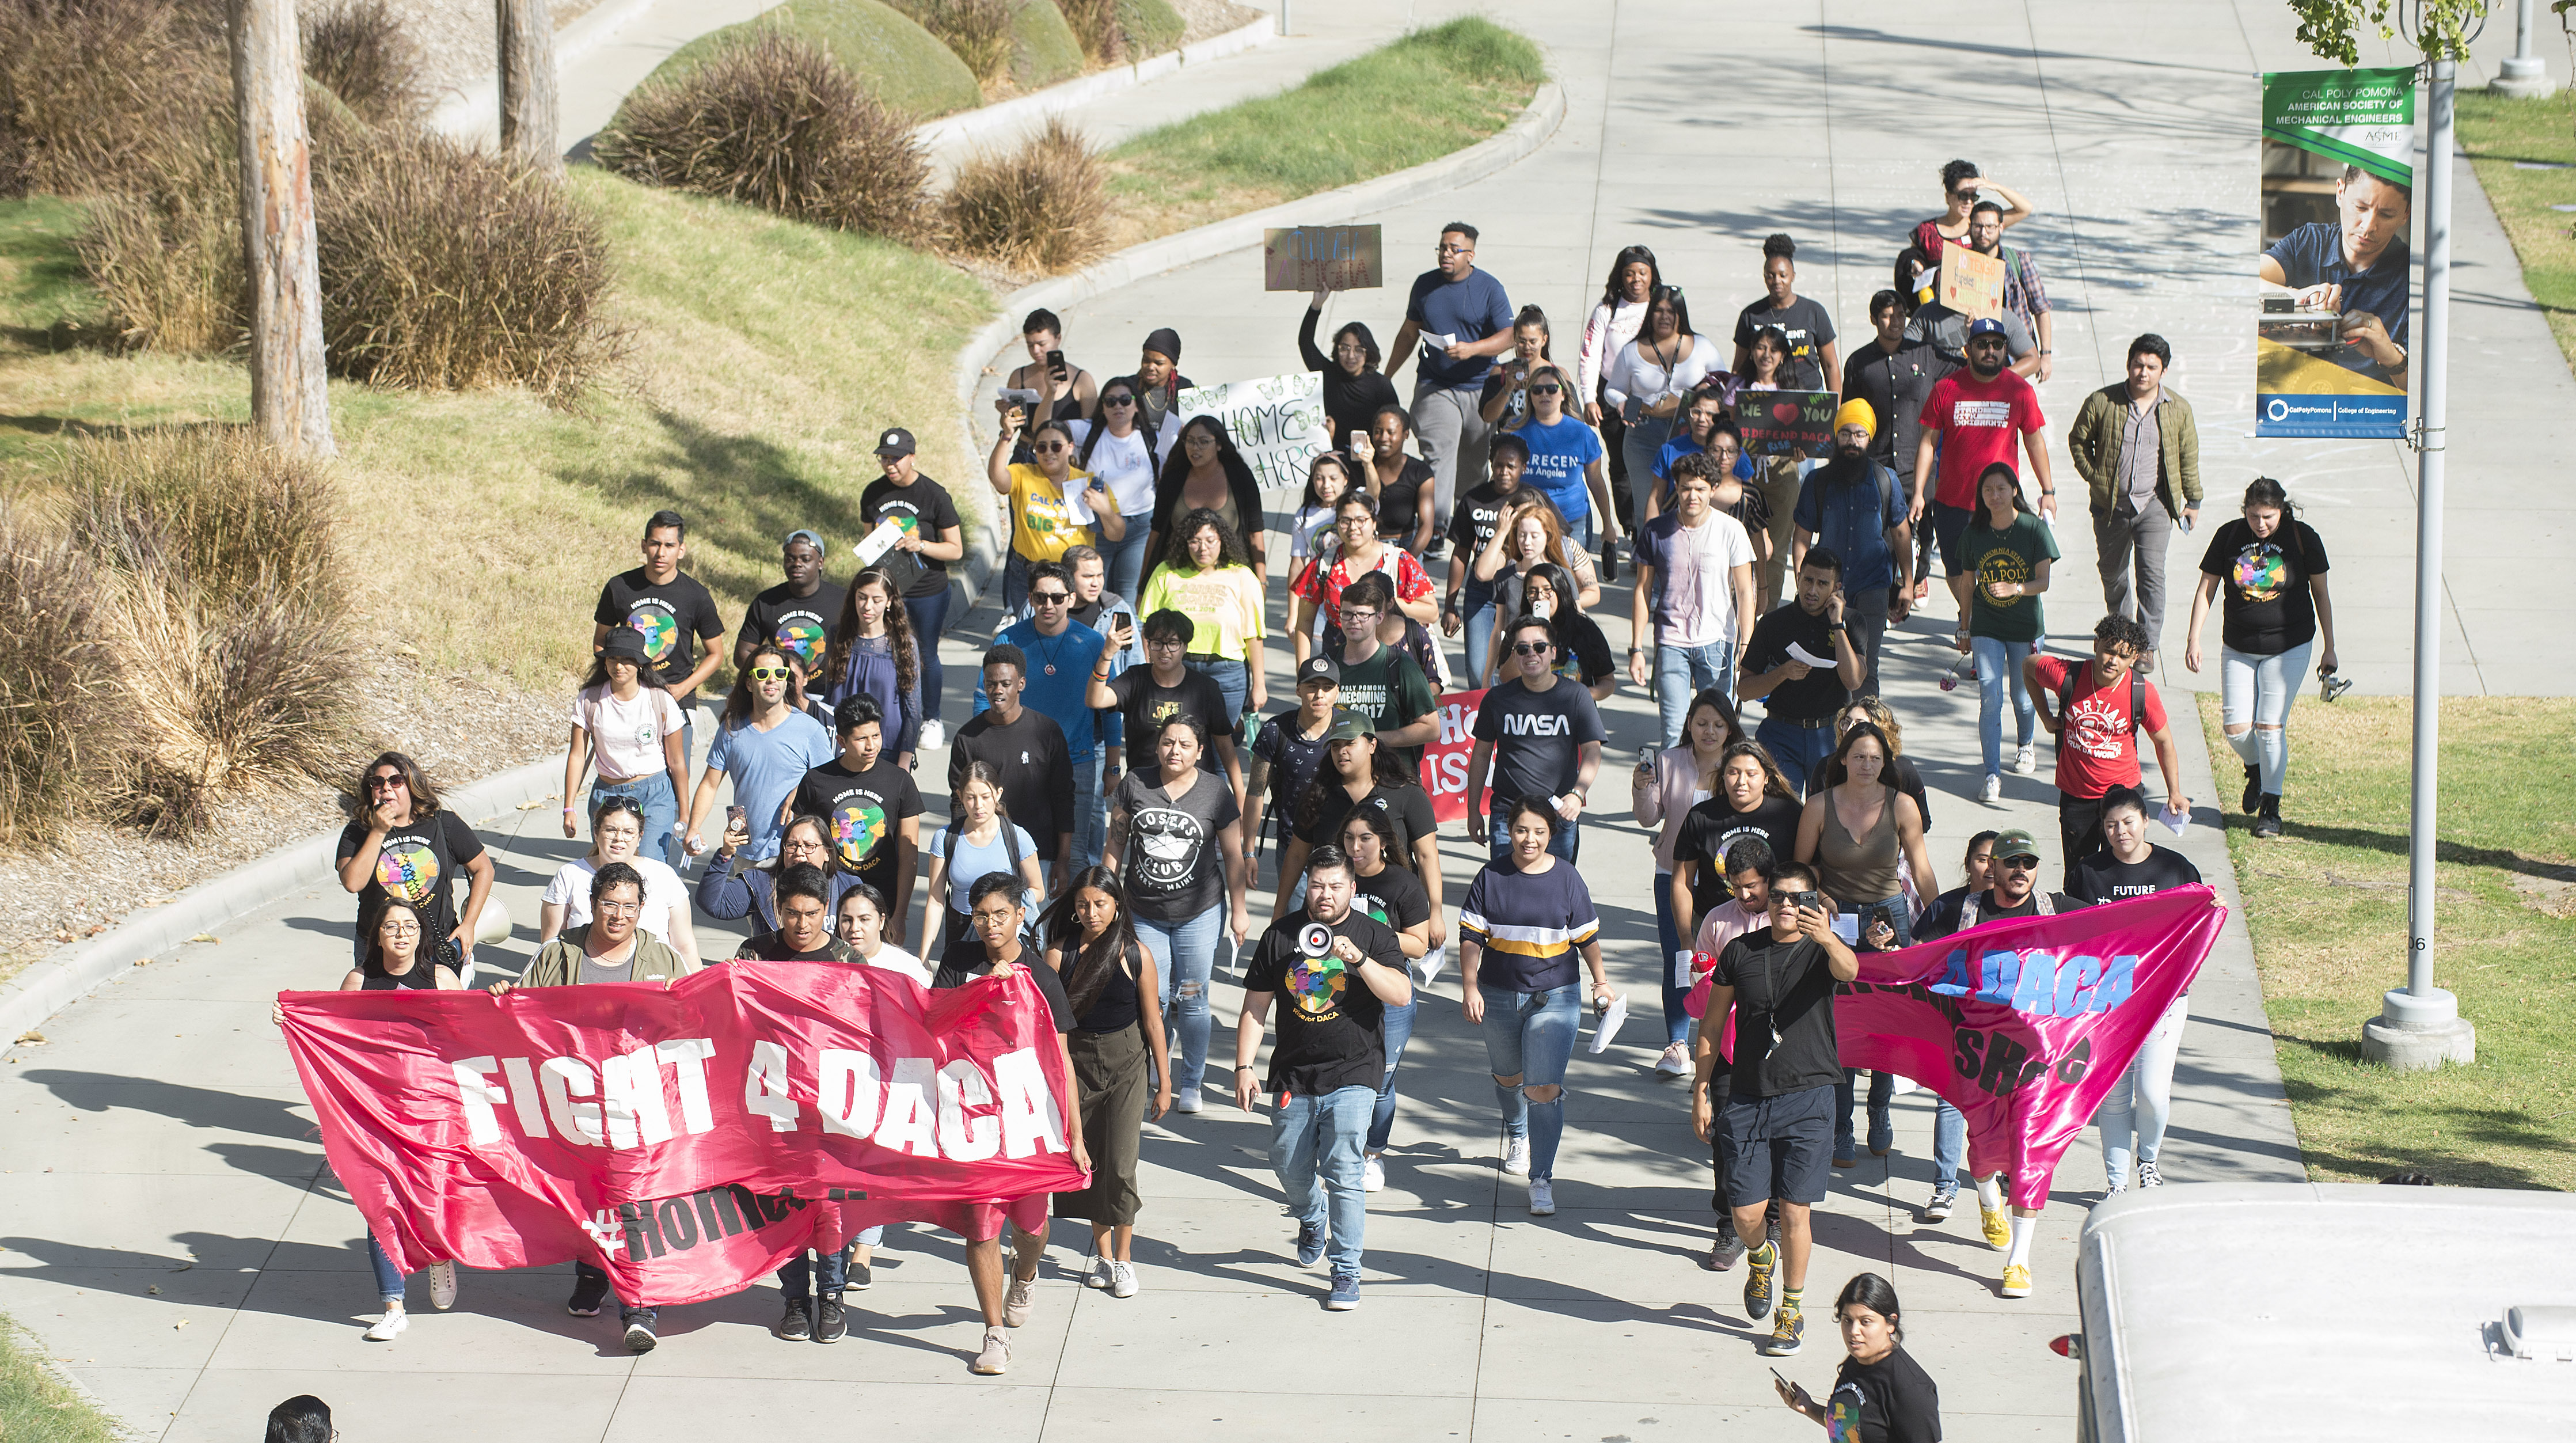 Students march on campus regarding the DACA bill being debated at the Supreme Court